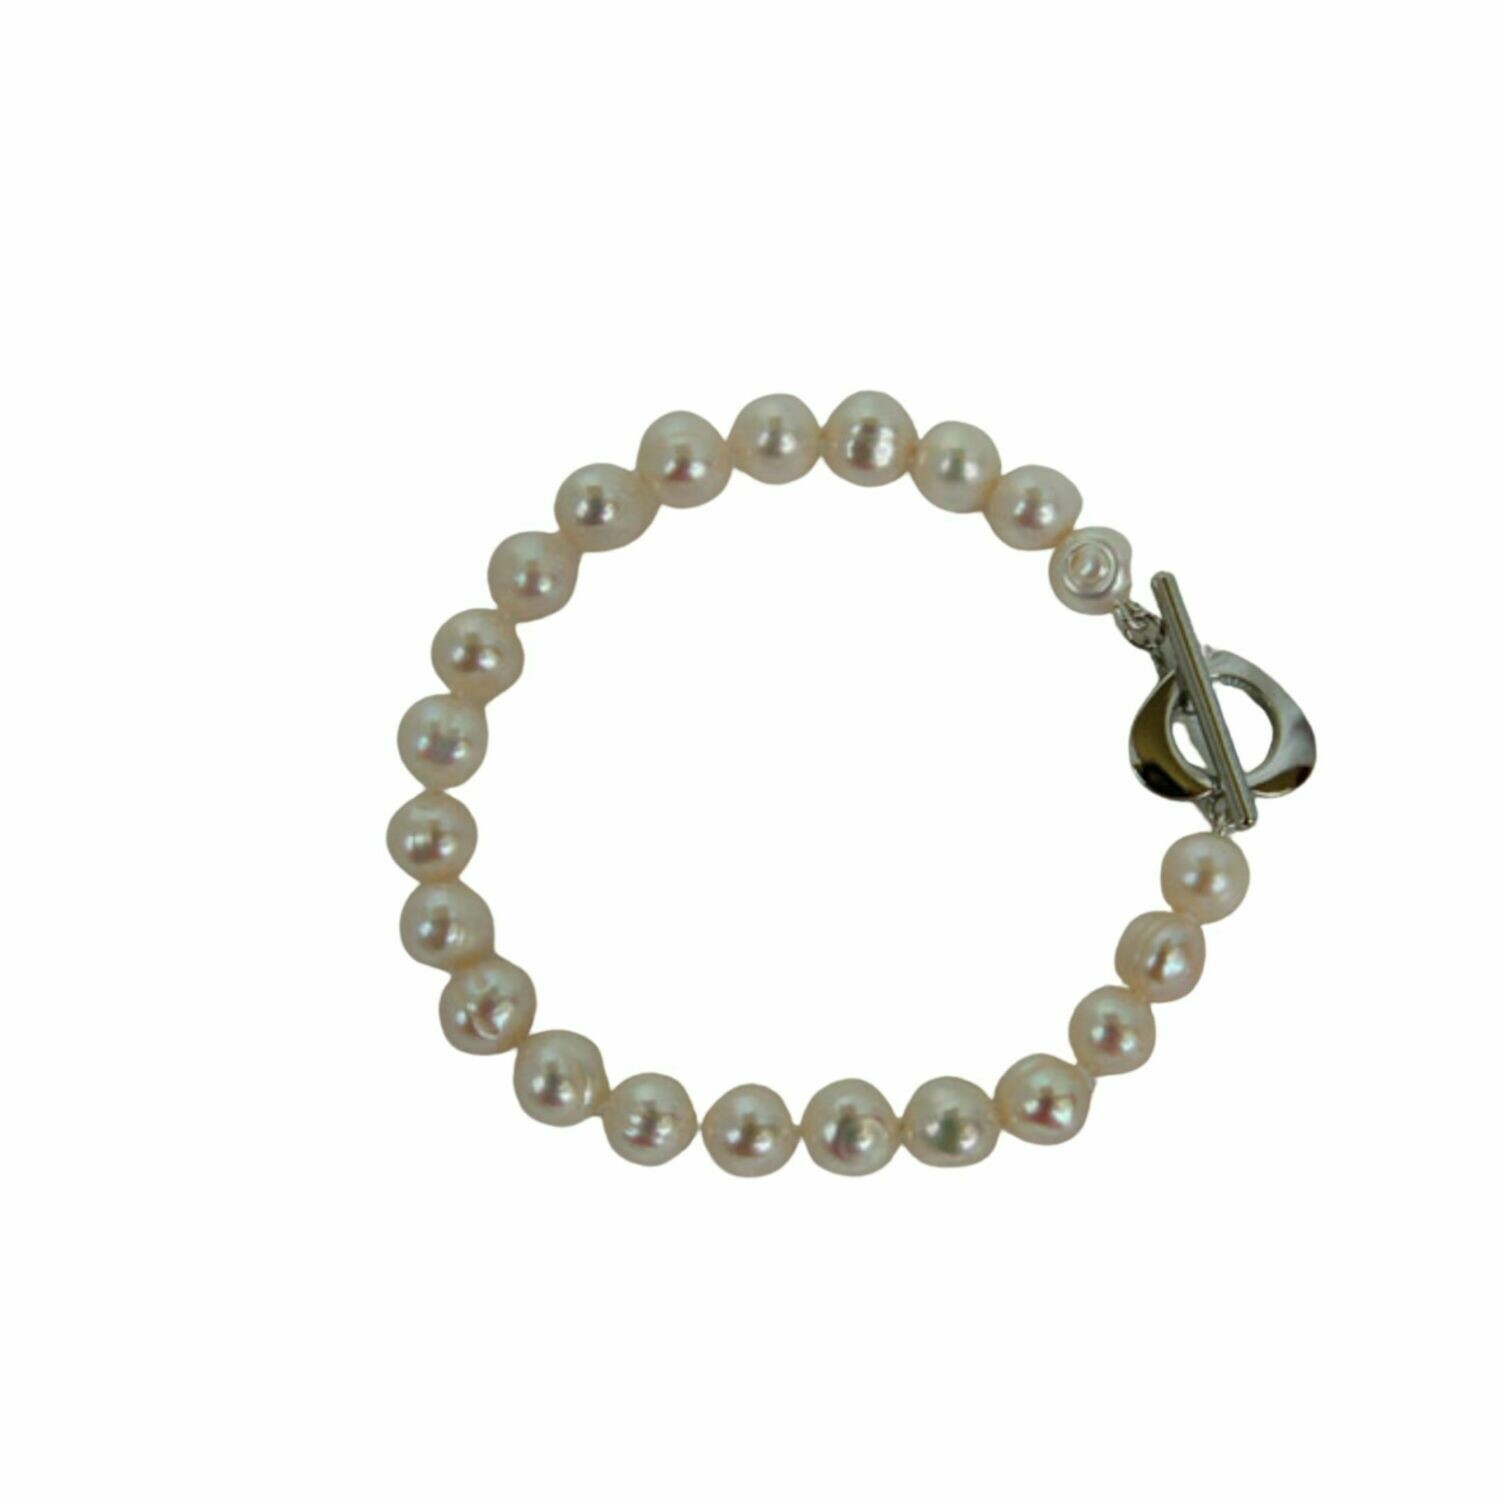 8 mm freshwater pearl bracelet with heart clasp